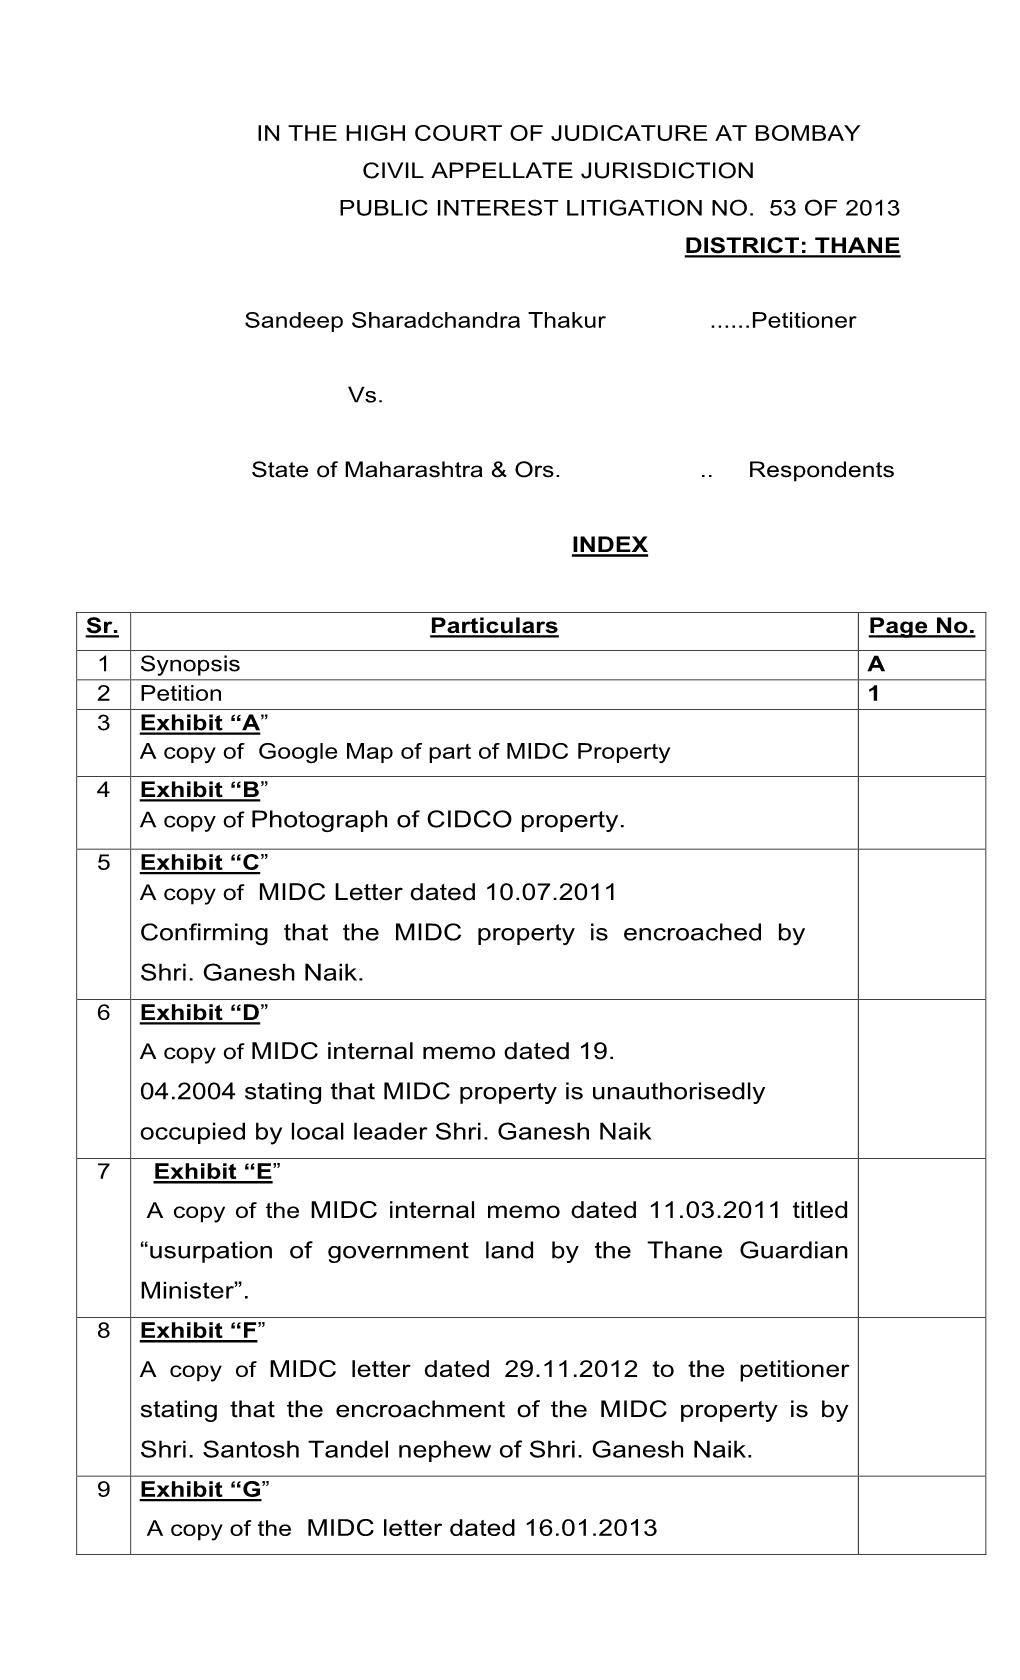 A Copy of Photograph of CIDCO Property. a Copy of MIDC Letter